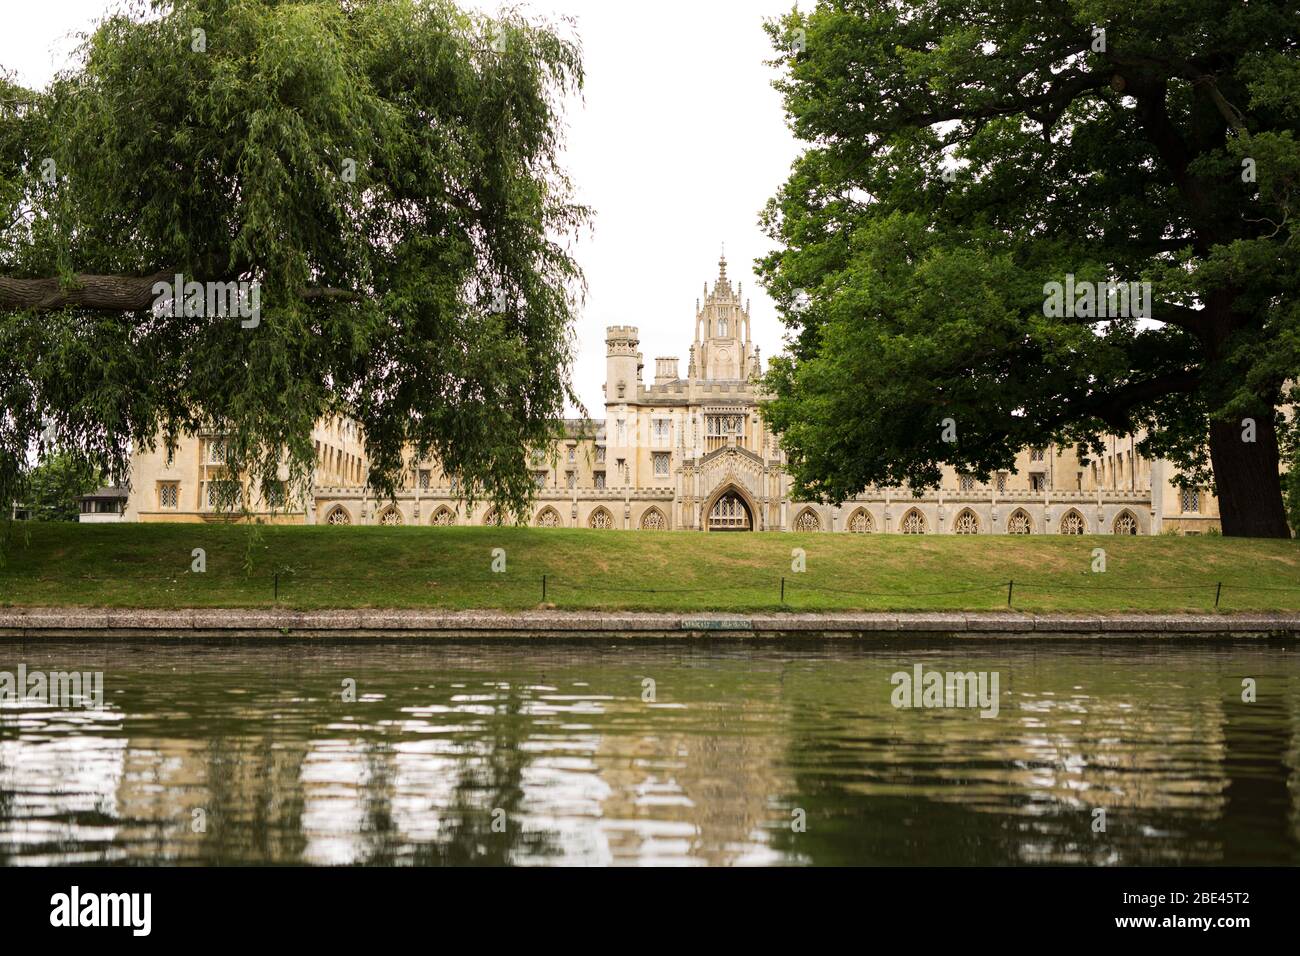 St John's College along the bank of the river Cam in Cambridge, England, United Kingdom. Stock Photo